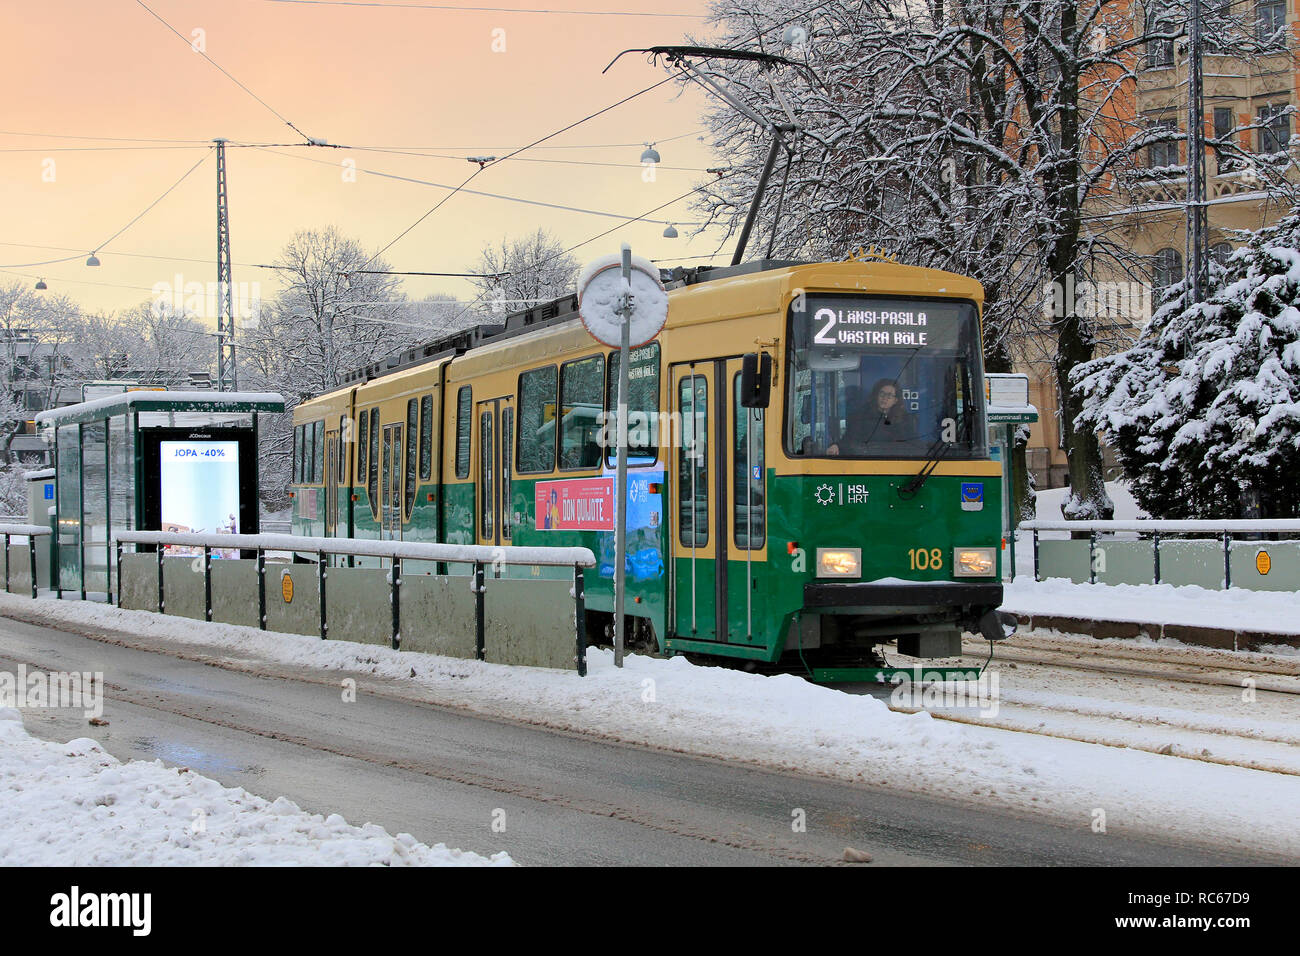 Helsinki, Finland - January 9, 2019: Green HSL tram No. 2 departs from tram stop on a beautiful day of winter with snowfall in Helsinki. Stock Photo